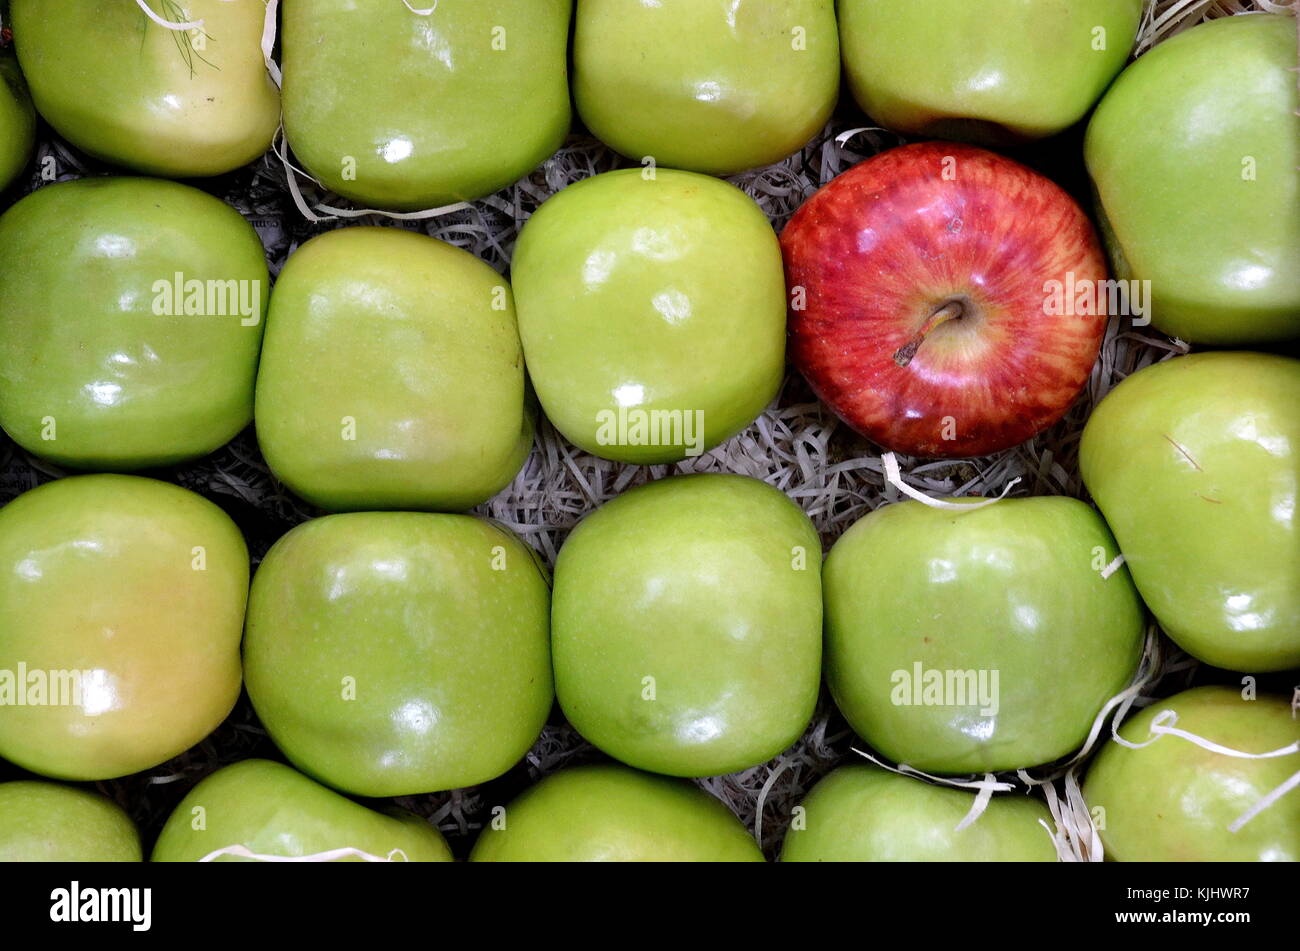 Red apple surrounded by green apples Stock Photo